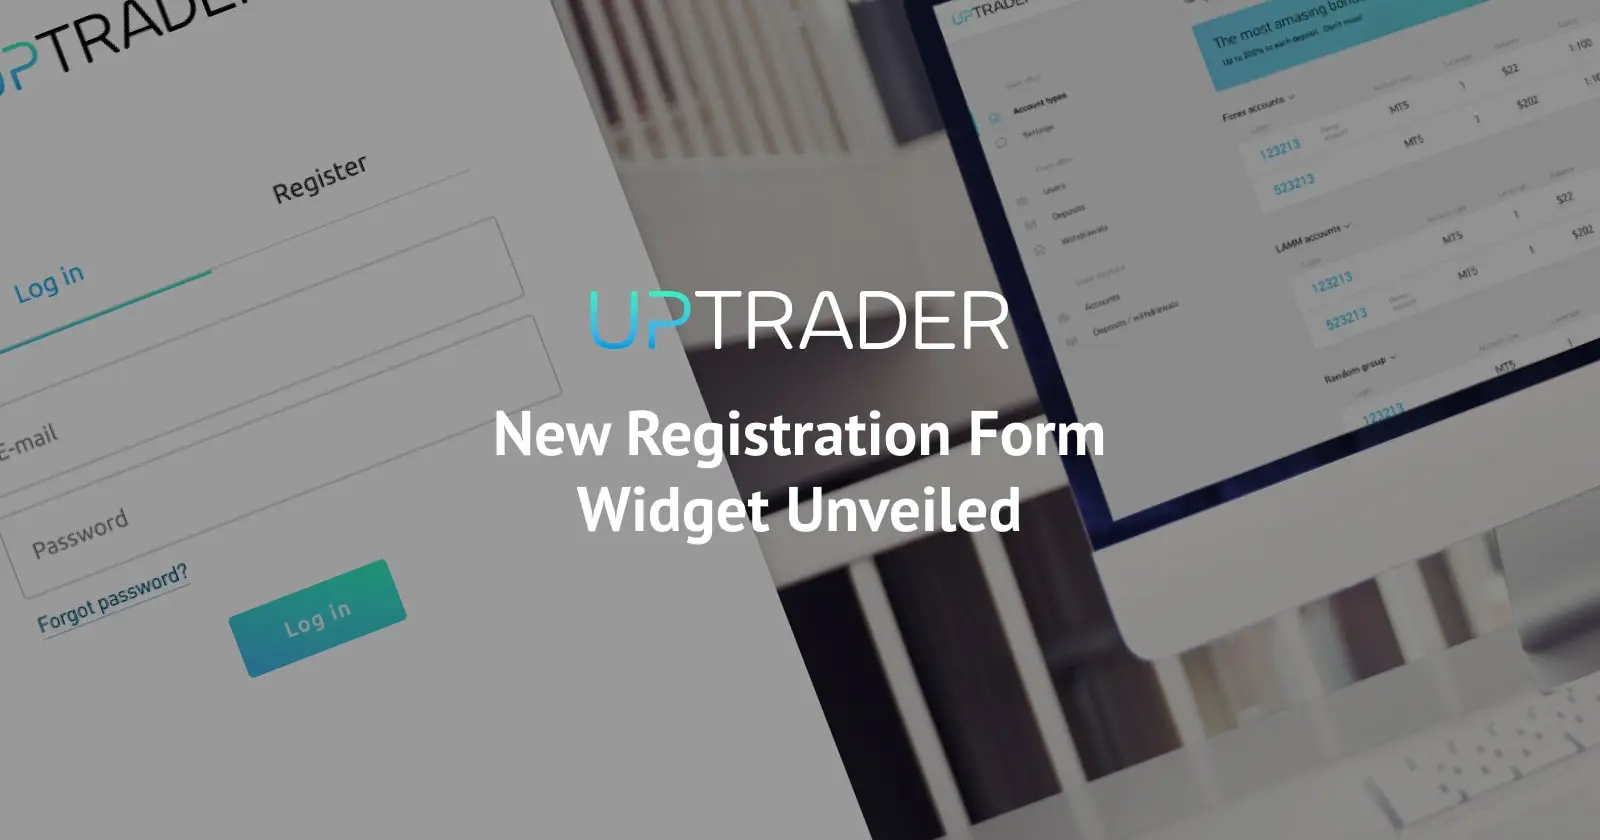 Exciting News for Brokers: Introducing the New Registration Form Widget